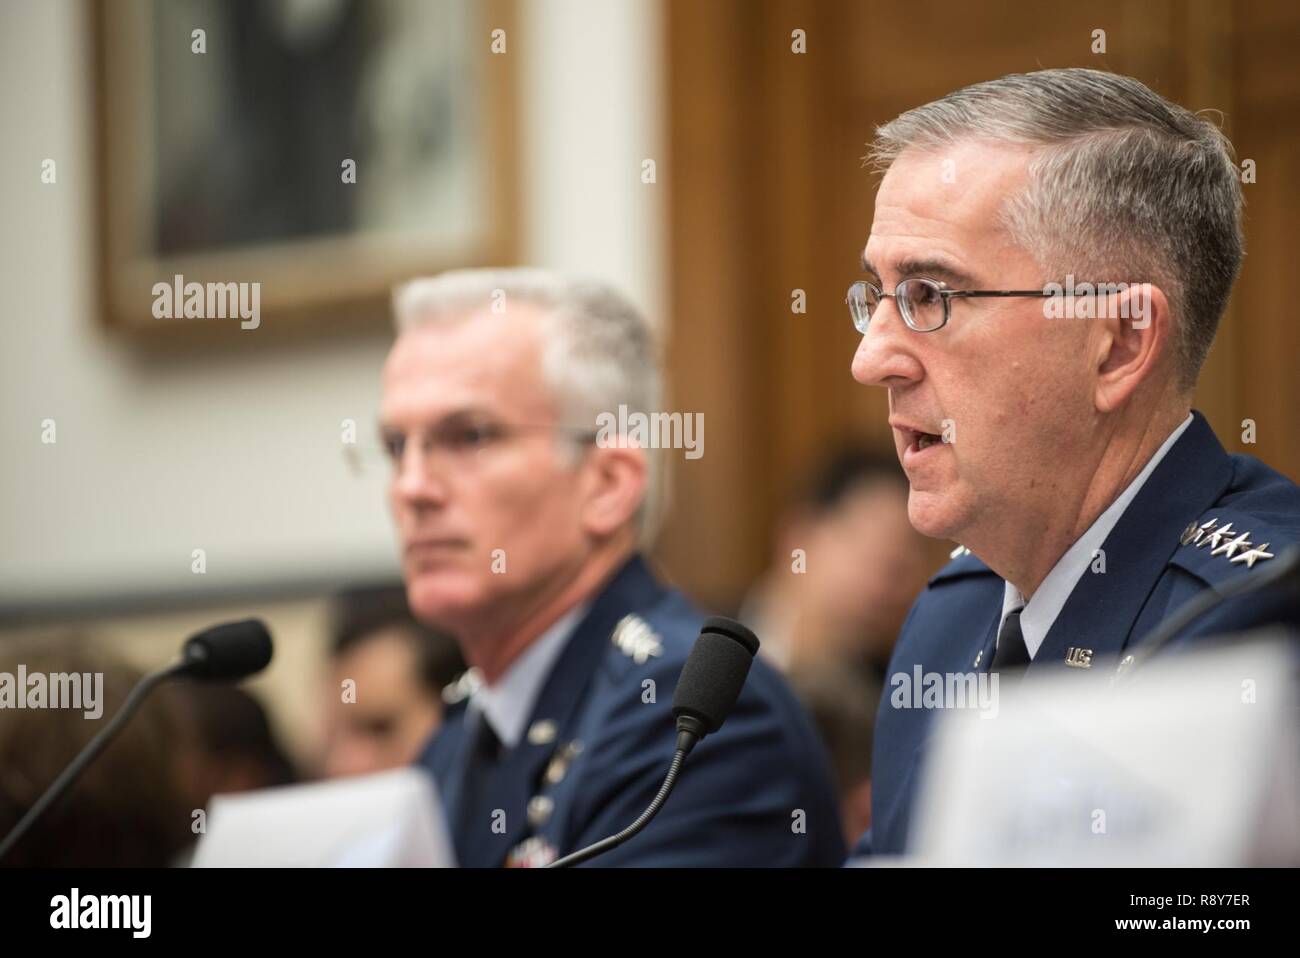 U.S. Air Force Gen. John E. Hyten, commander of U.S. Strategic Command, testifies during a House Armed Services Committee hearing on Capitol Hill, March 7, 2017. Gen. Hyten testified alongside U.S. Air Force Gen. Paul J. Selva, Vice Chairman of the Joint Chiefs of Staff; U.S. Navy Adm. Bill Moran, Vice Chief of Naval Operations; and U.S. Air Force Vice Chief of Staff Gen. Stephen Wilson. They spoke about the continuing relevance of U.S. nuclear forces for our national security and the steps the Joint Force is taking to modernize and replace them. He also stated that U.S. weapons, delivery syst Stock Photo